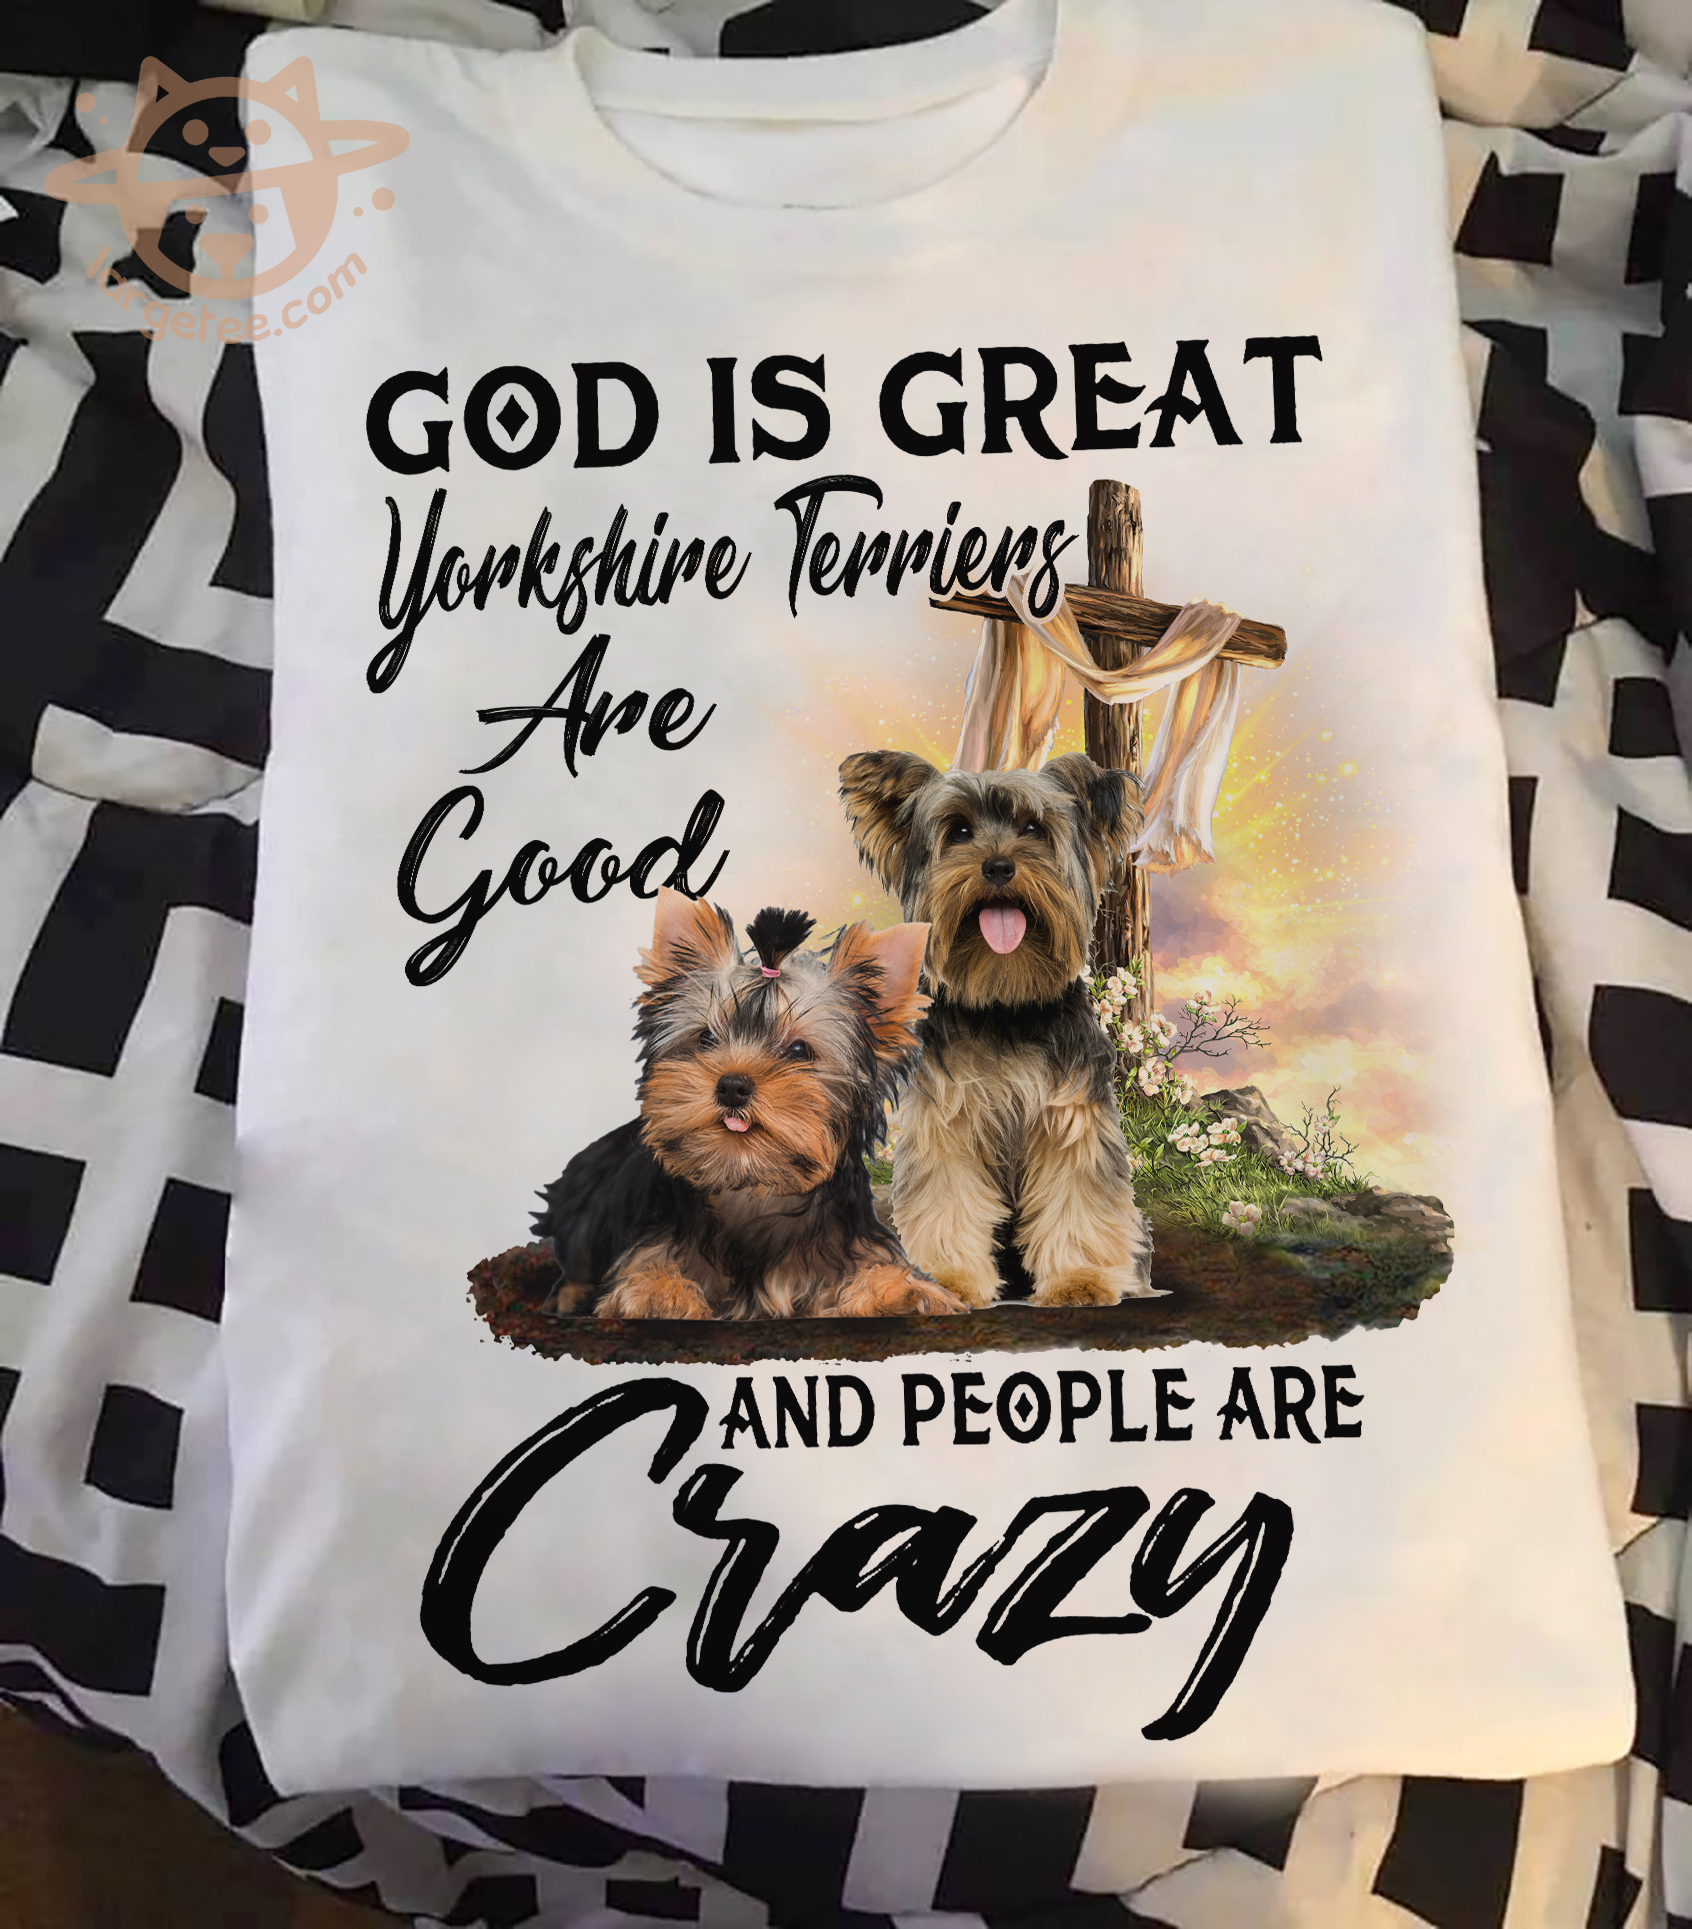 Yorkshire Terrier Dog - God is great Yorkshire Terriers are good and people are crazy